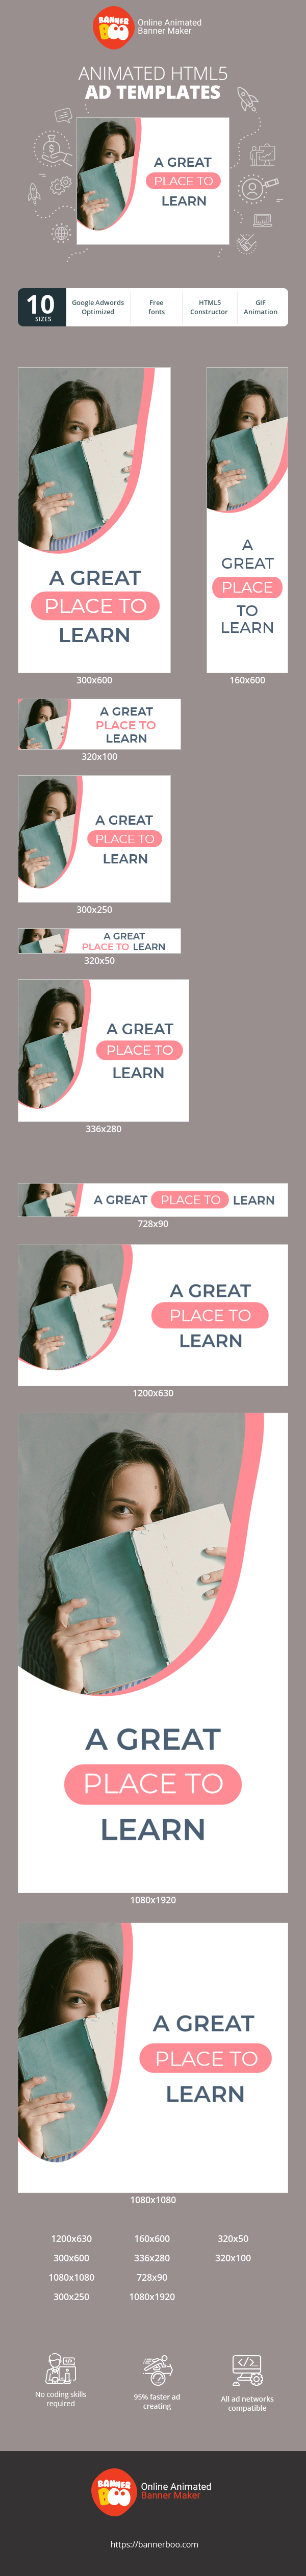 Шаблон рекламного банера — A Great Place To Learn — 100 Courses For Free